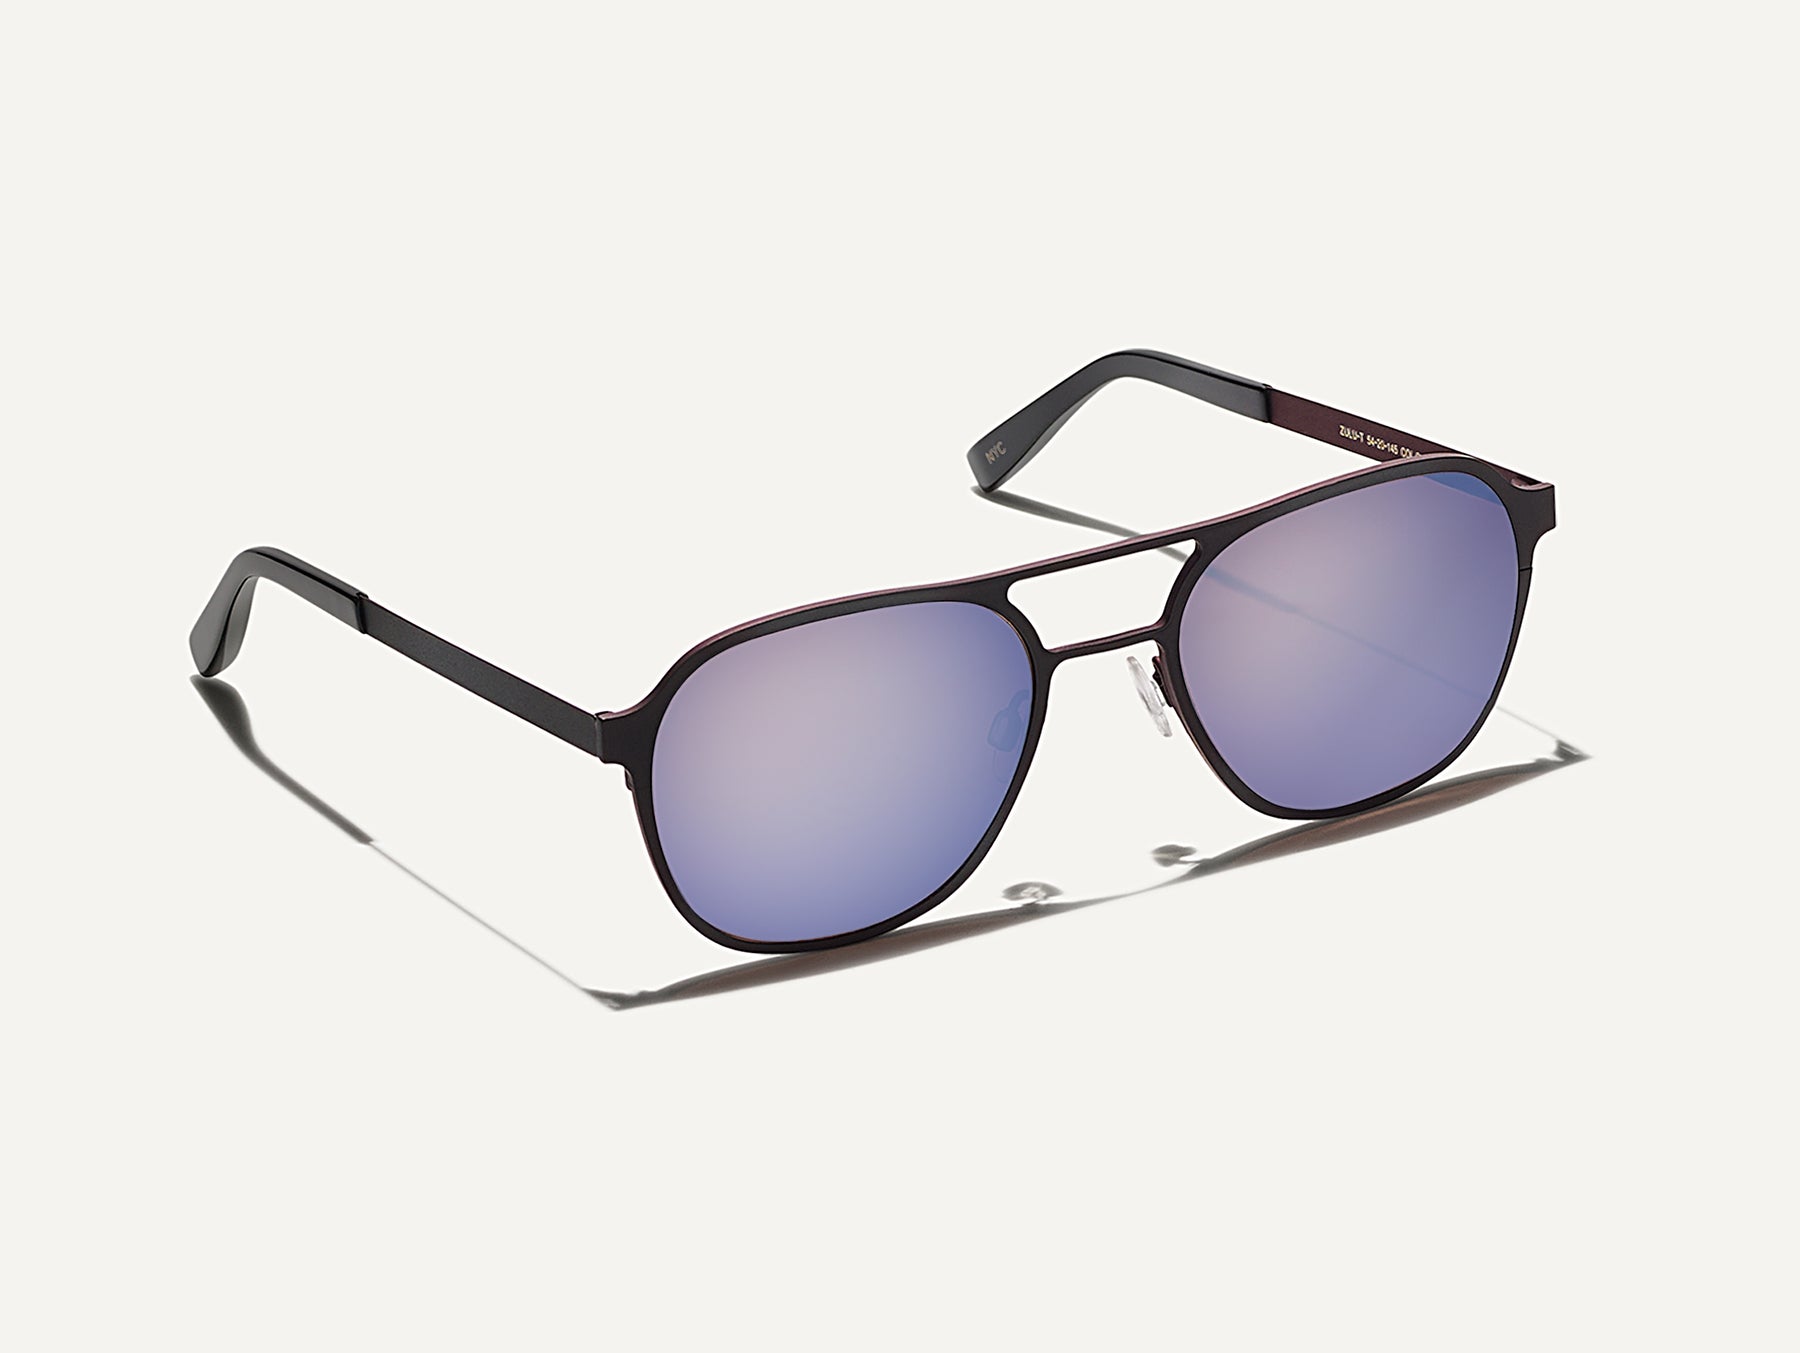 The ZULU-T SUN in charcoal/wine with Blue Flash Mirror Lenses